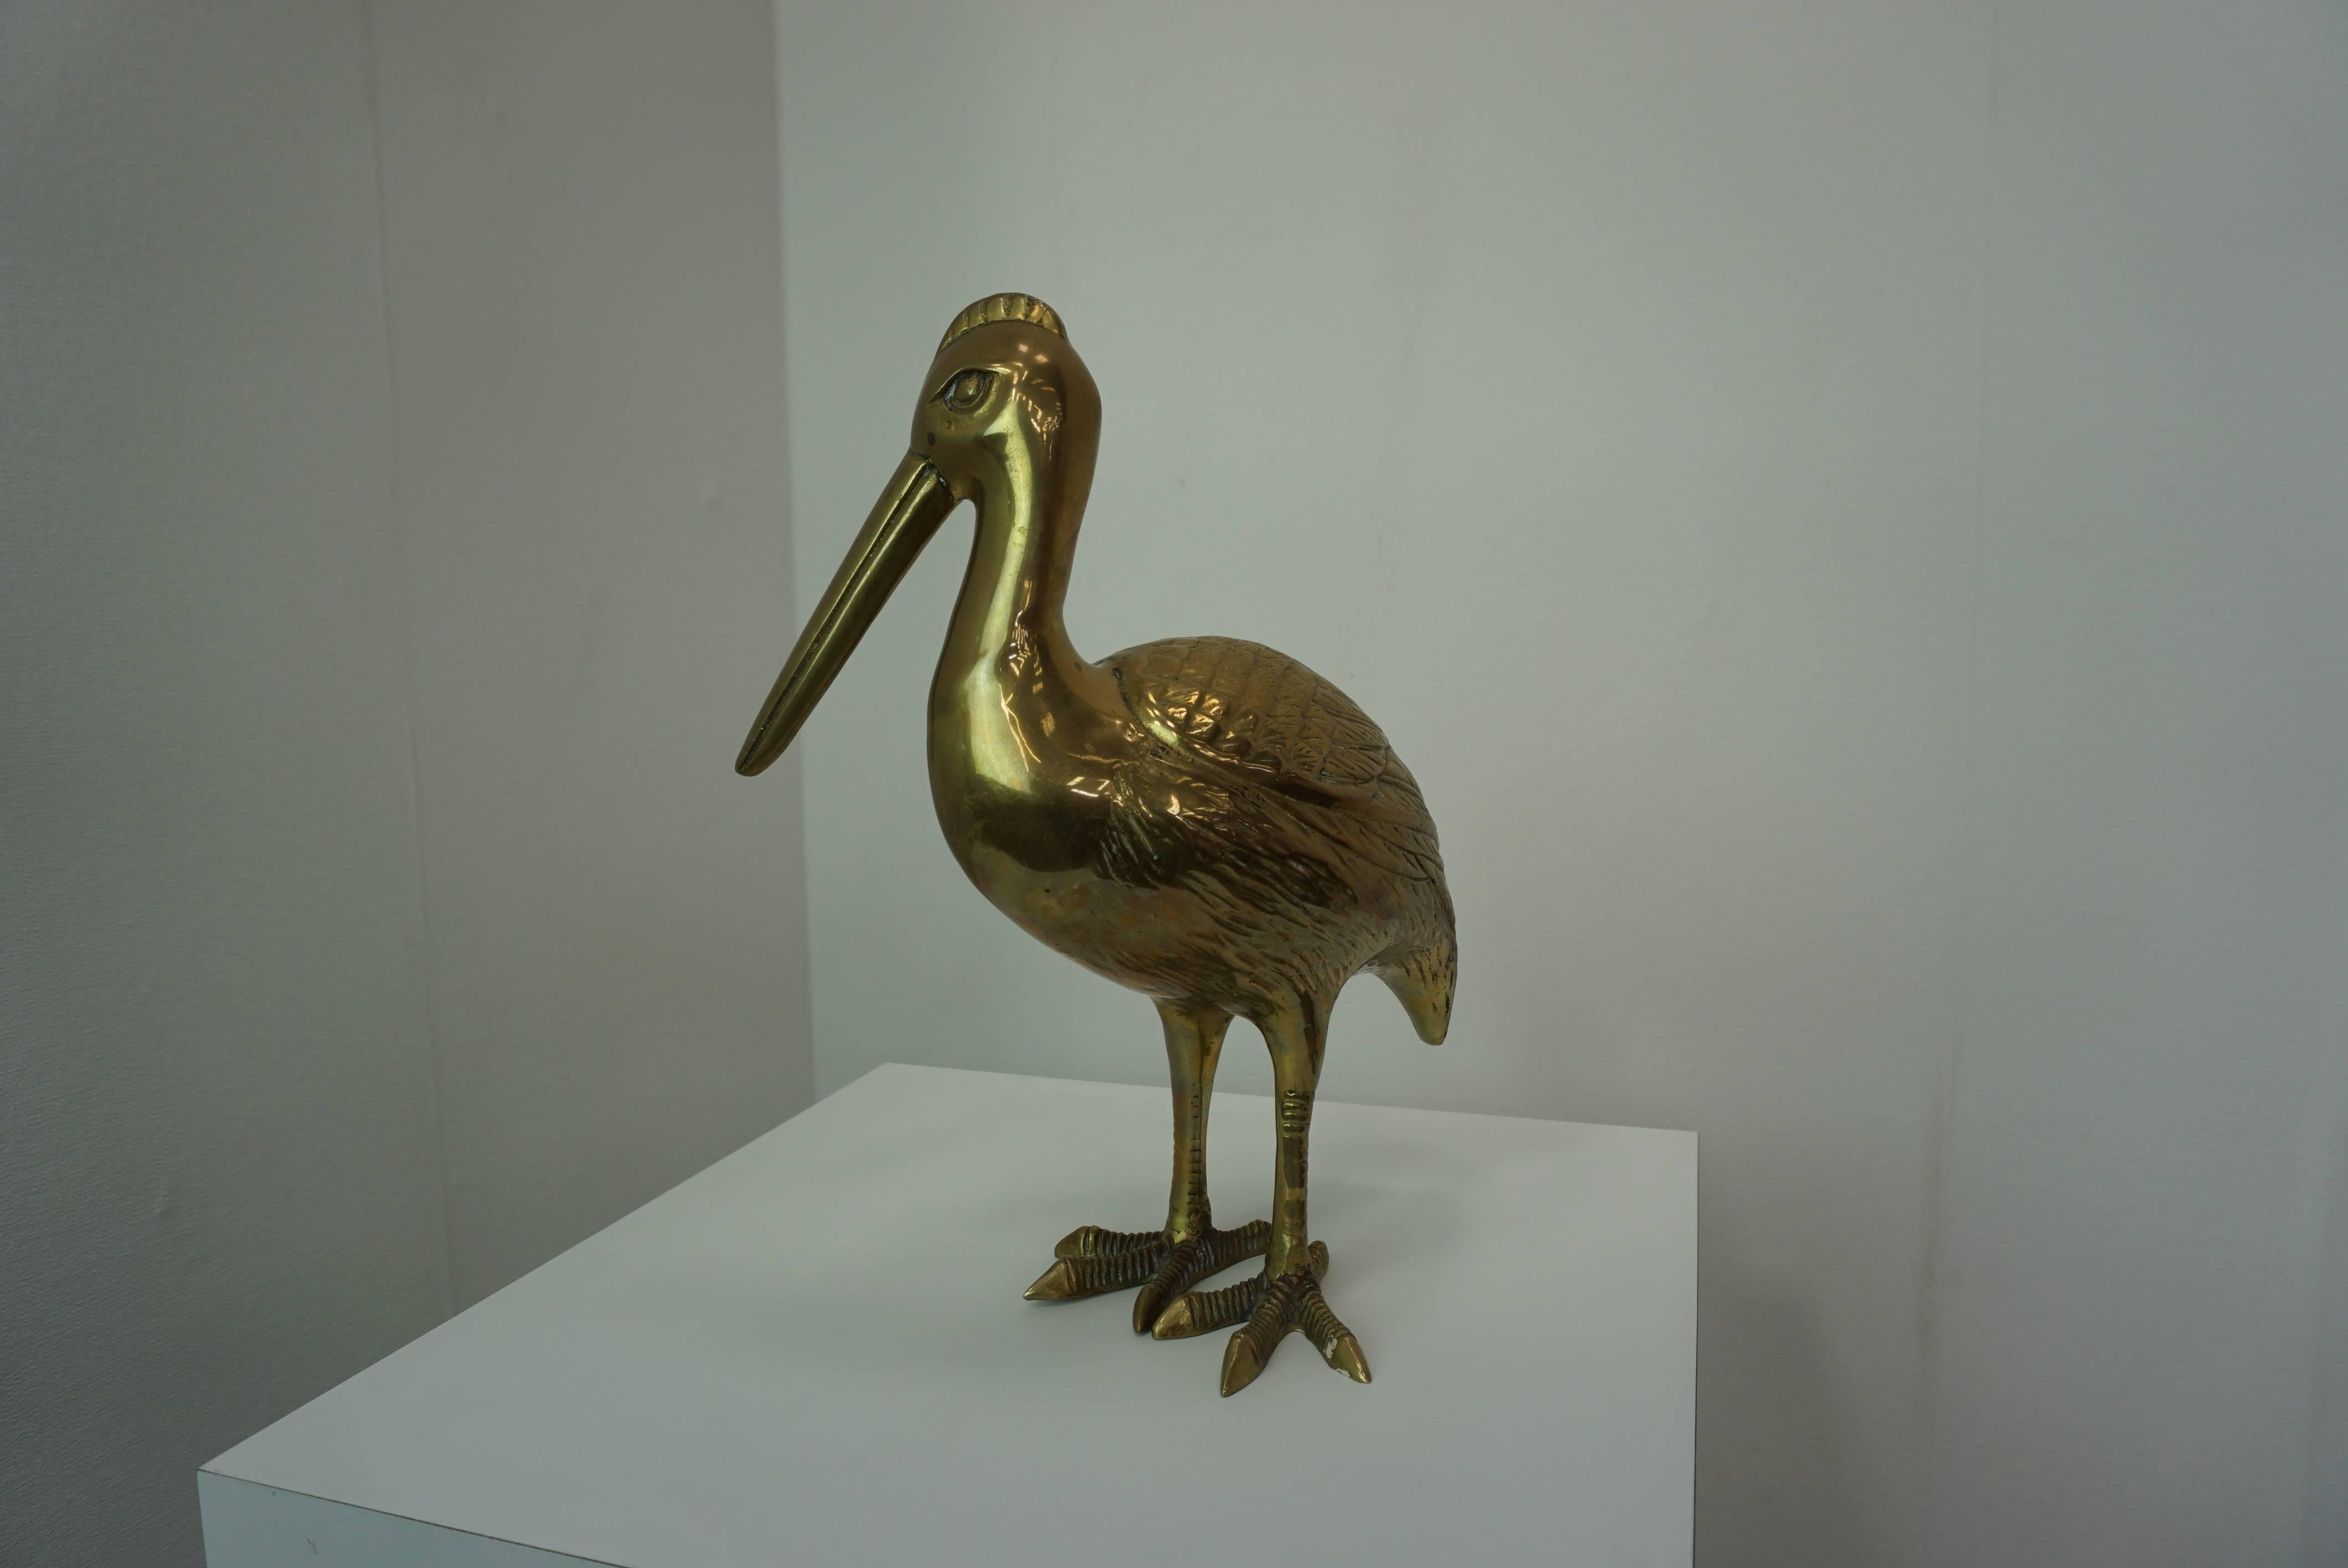 Large brass woodcock, very decorative and unique.